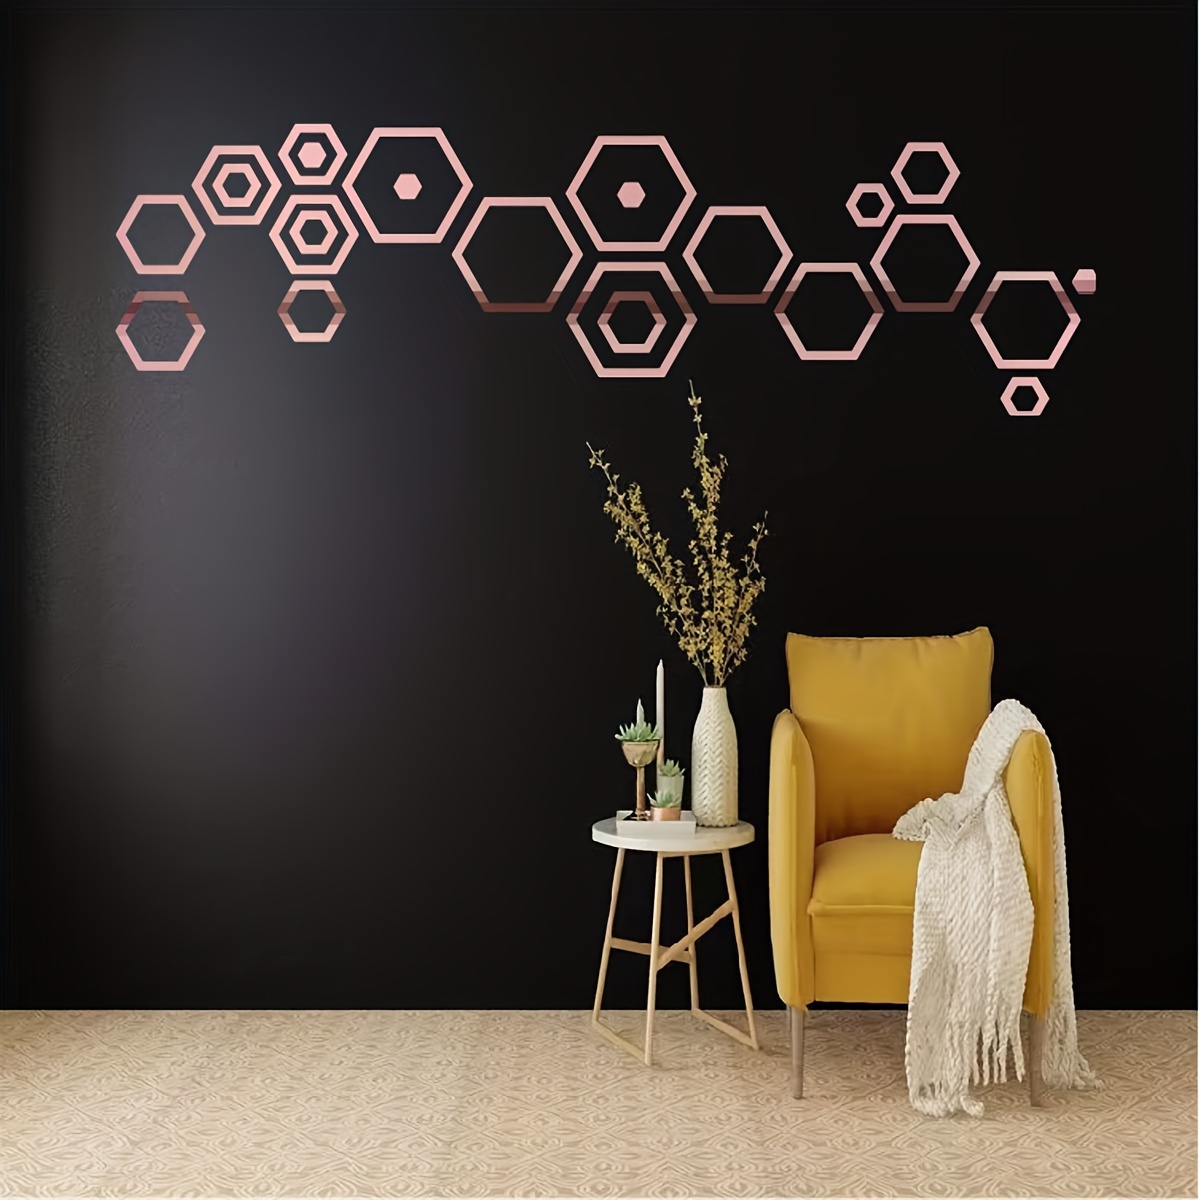 DIY Honeycomb Wall Decor for the Home